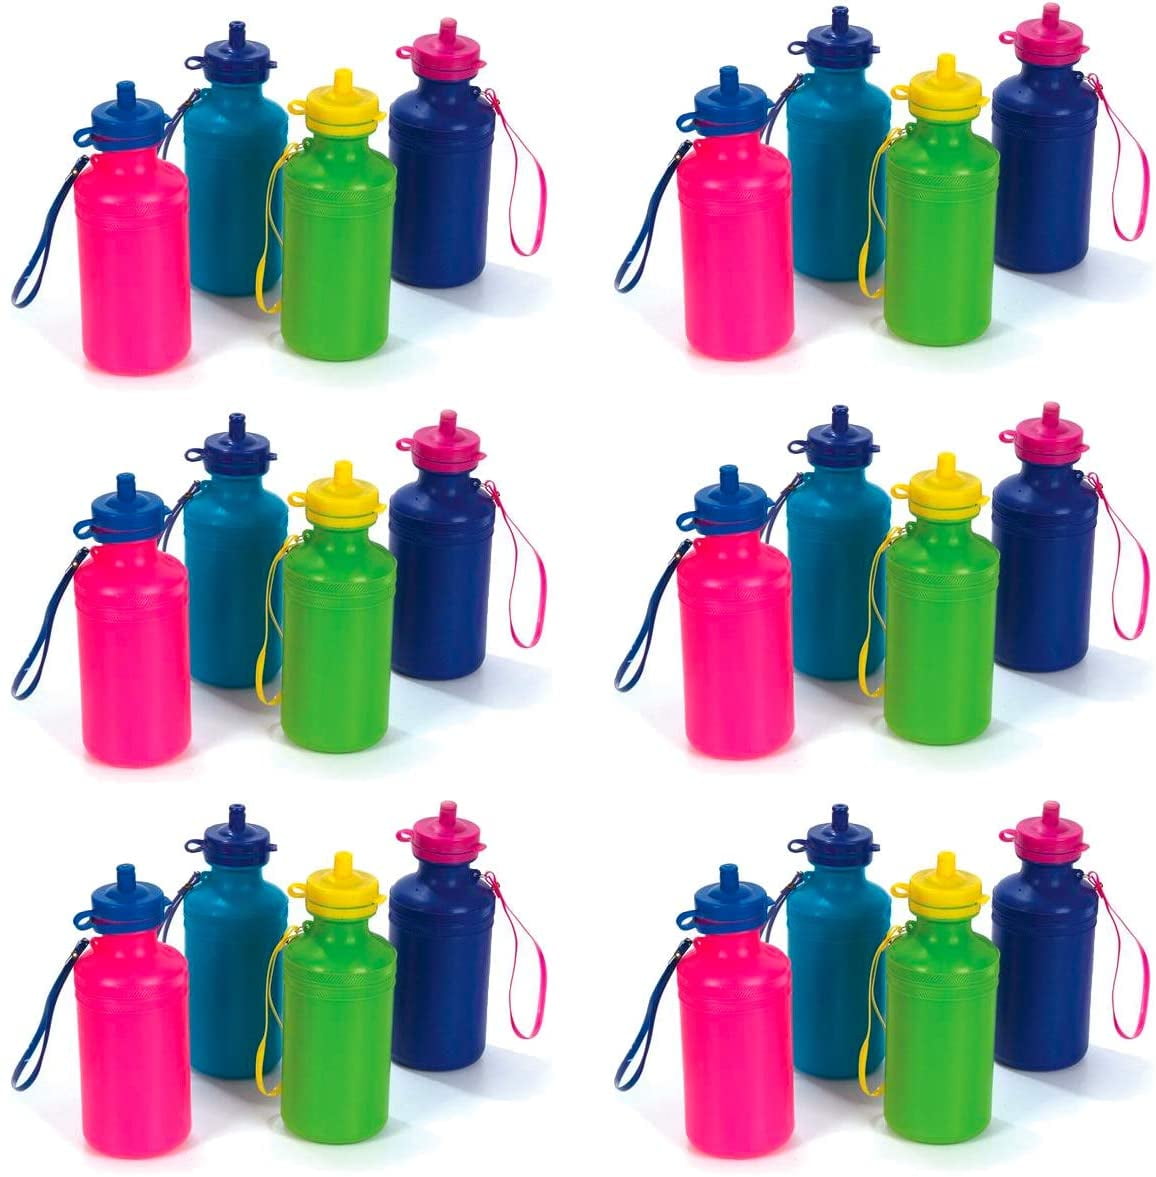 12 Kids Water Bottles Bulk Pack, Summer Beach Accessory | Holds 18 Ounces,  6 Different Neon Colors With Wrist Strap (12 Pack)